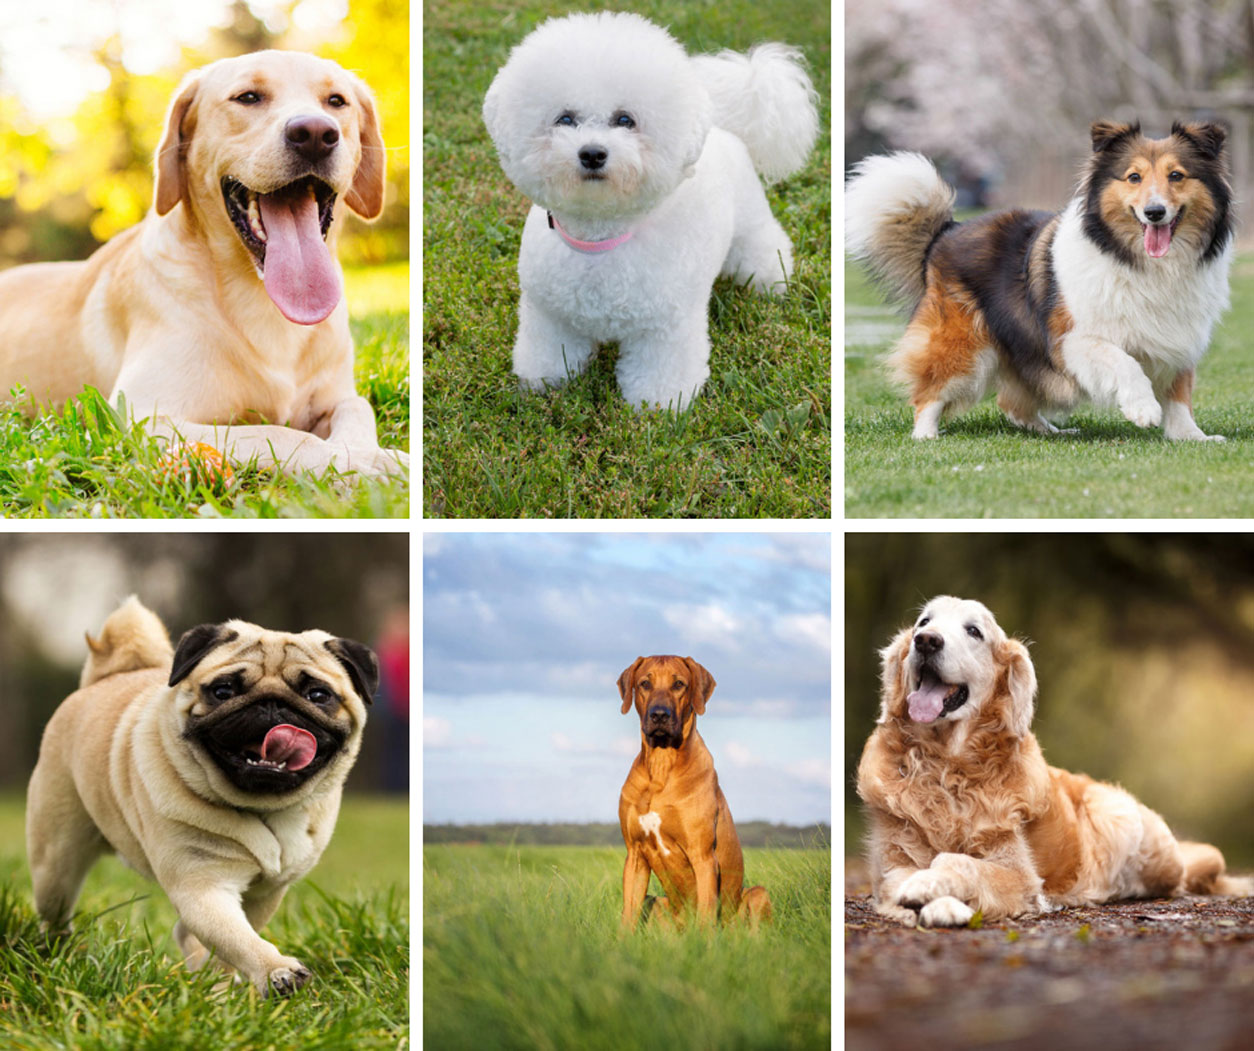 How to choose the best dog breed for your family What Kind Of Dog Should We Get The Best Dogs For Kids Familyeducation